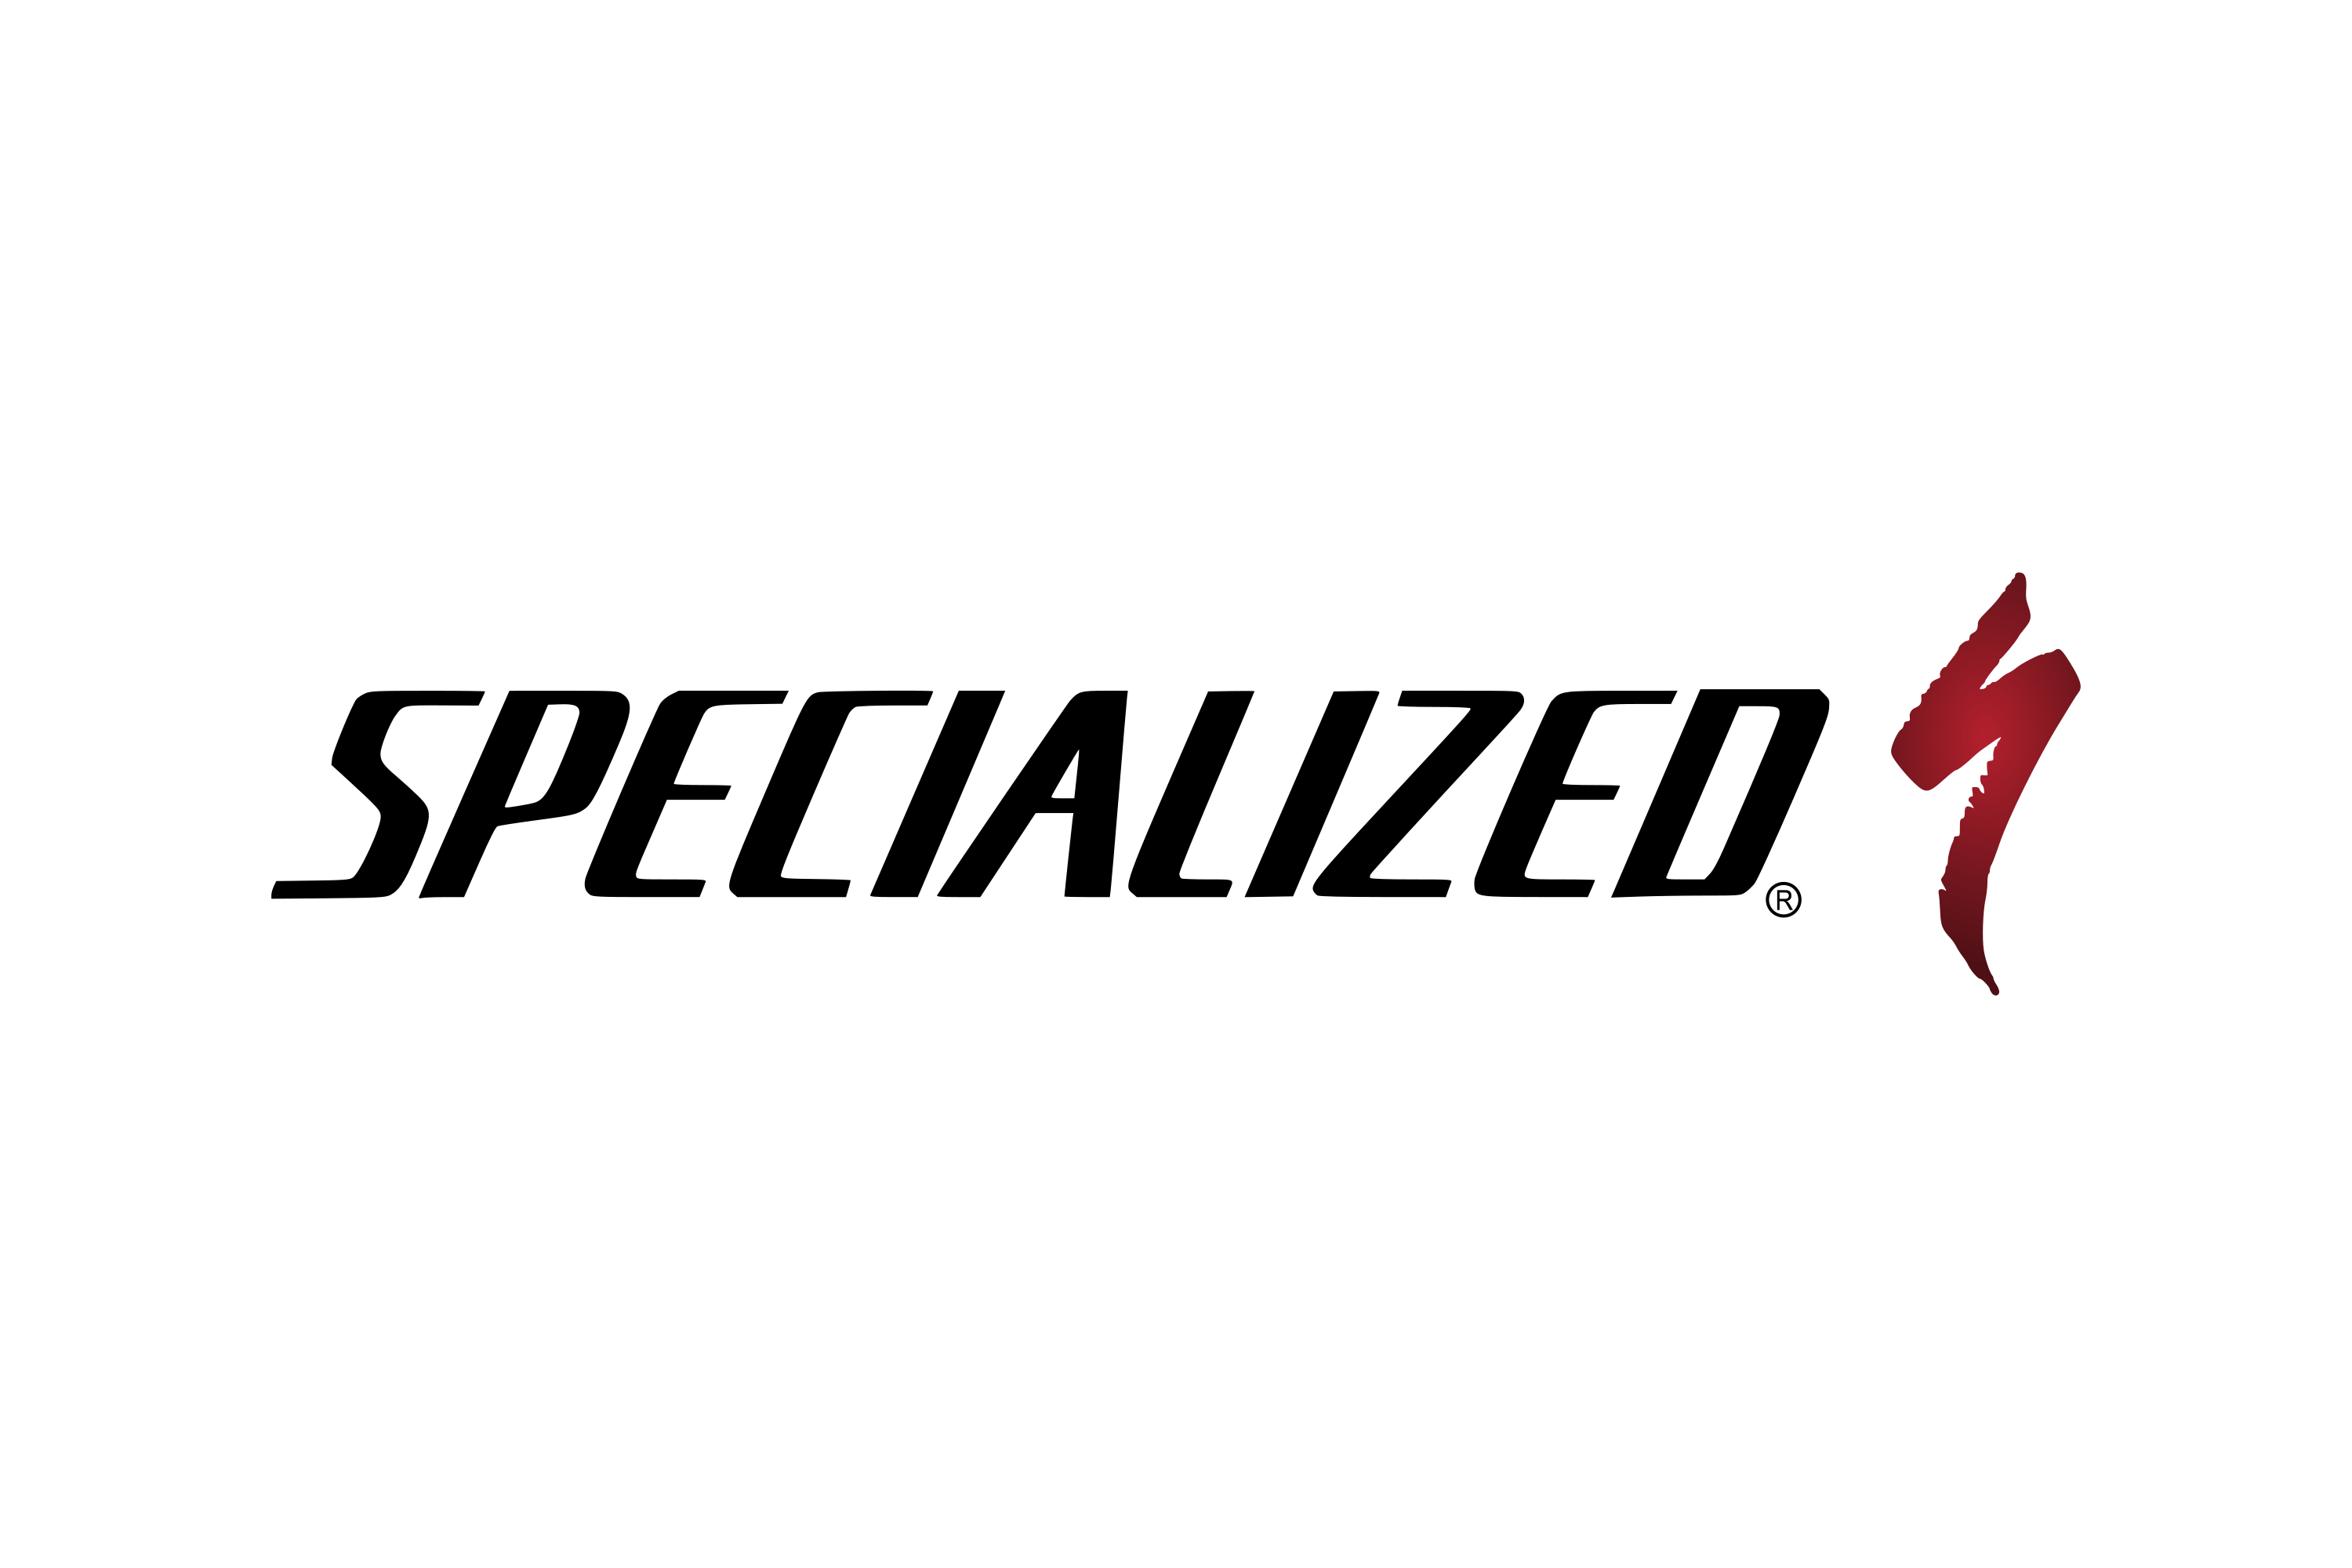 Download Specialized Bicycle Components Logo in SVG Vector or PNG File